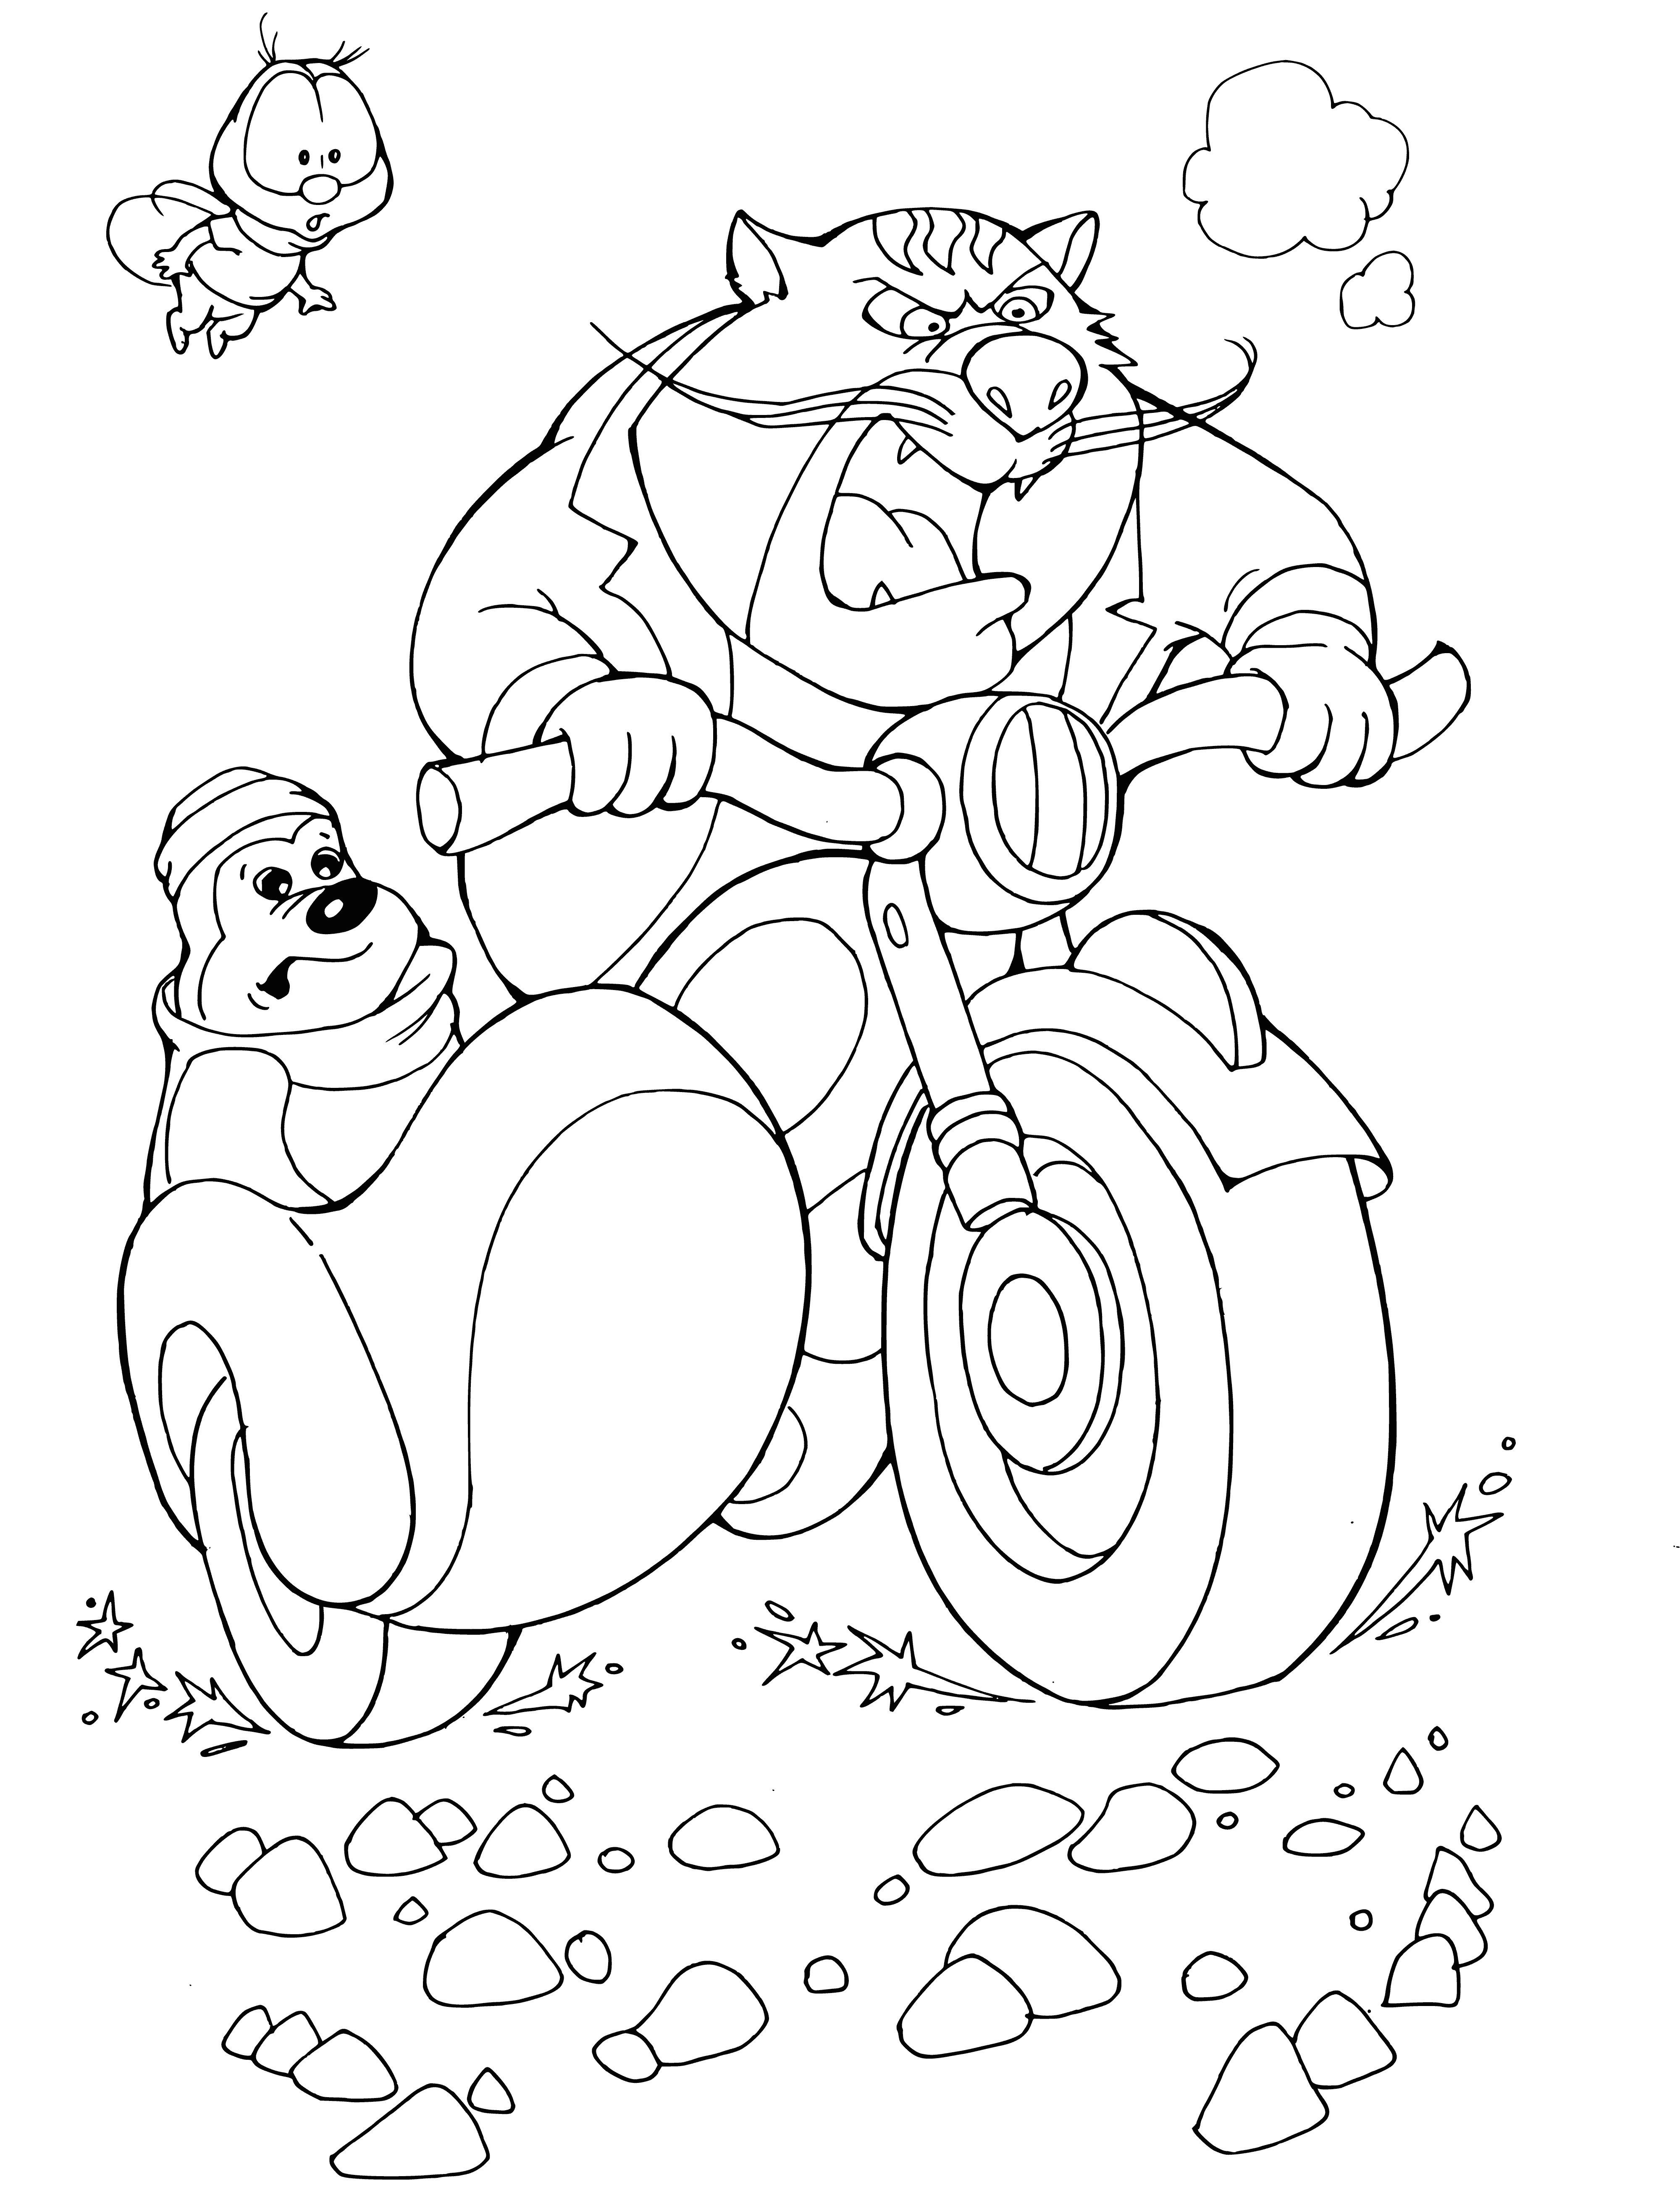 Fat Cat on a Motorcycle coloring page